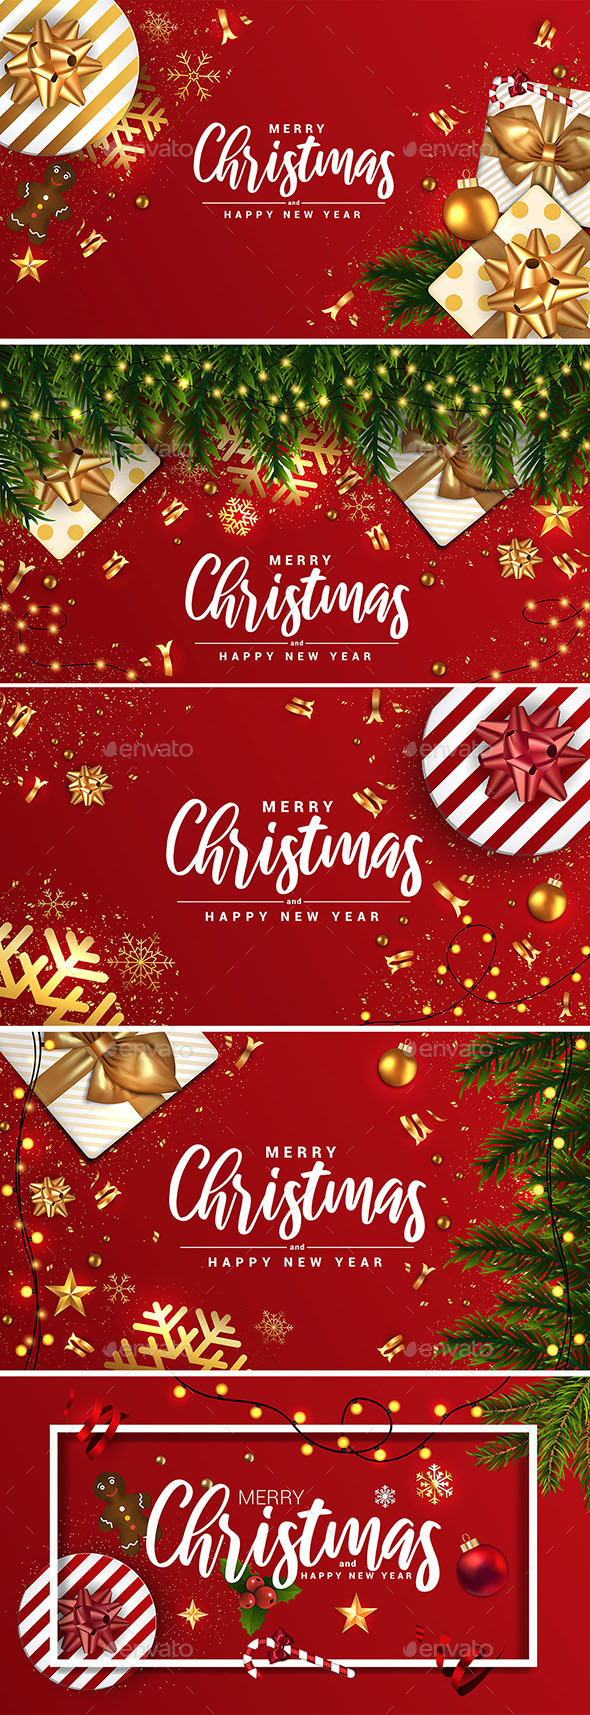 Merry Christmas and Happy New Year Banners